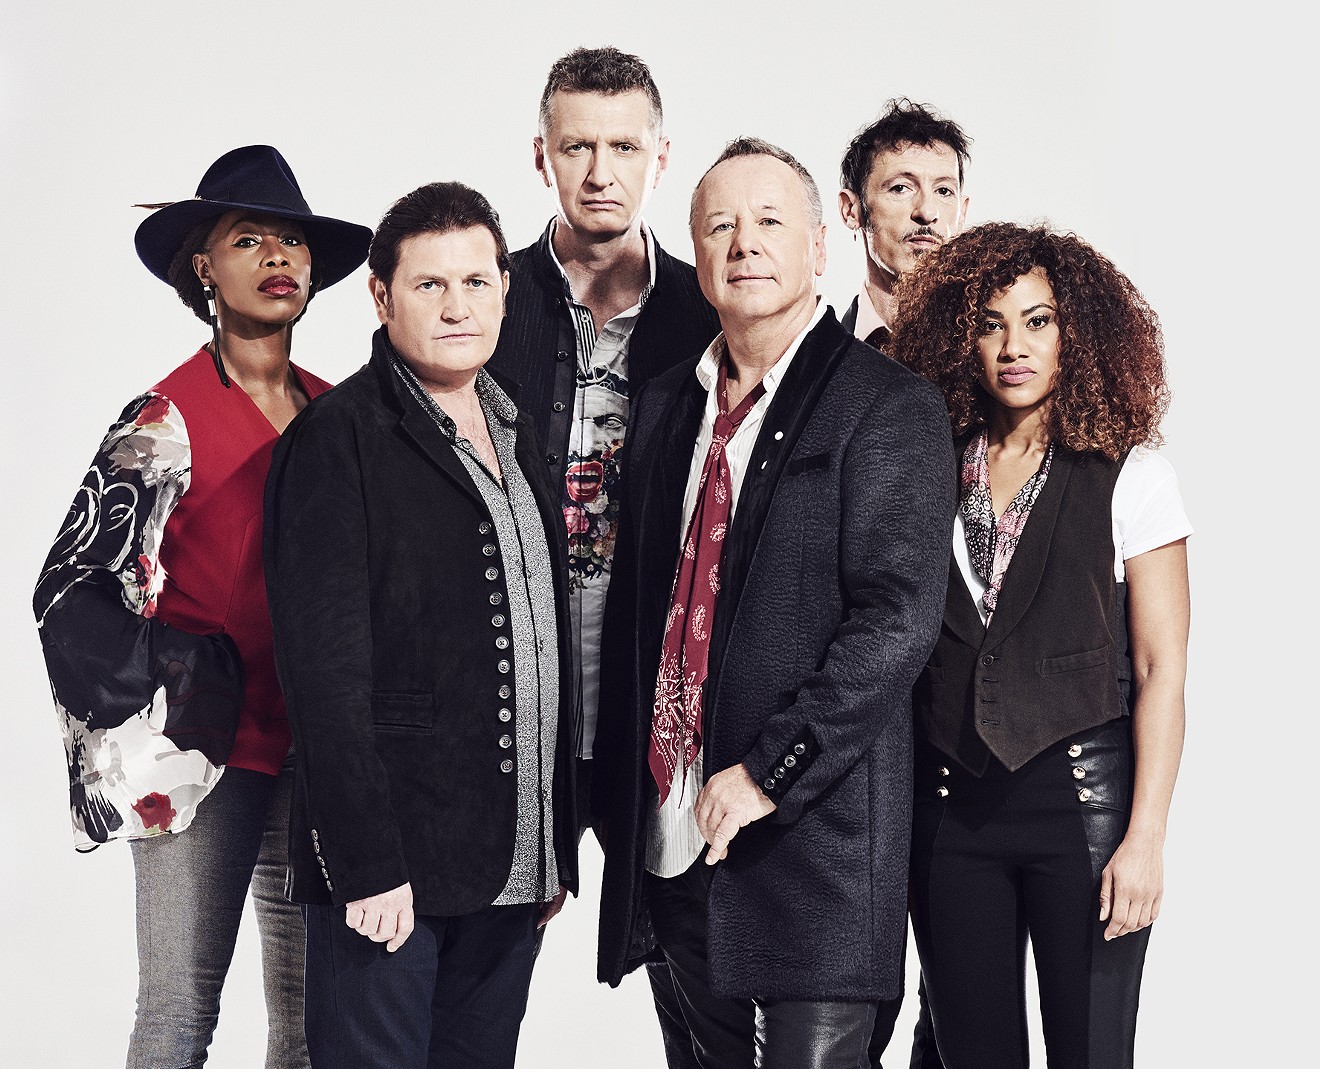 Simple Minds headlines the Paramount Theatre on Thursday, October 18.